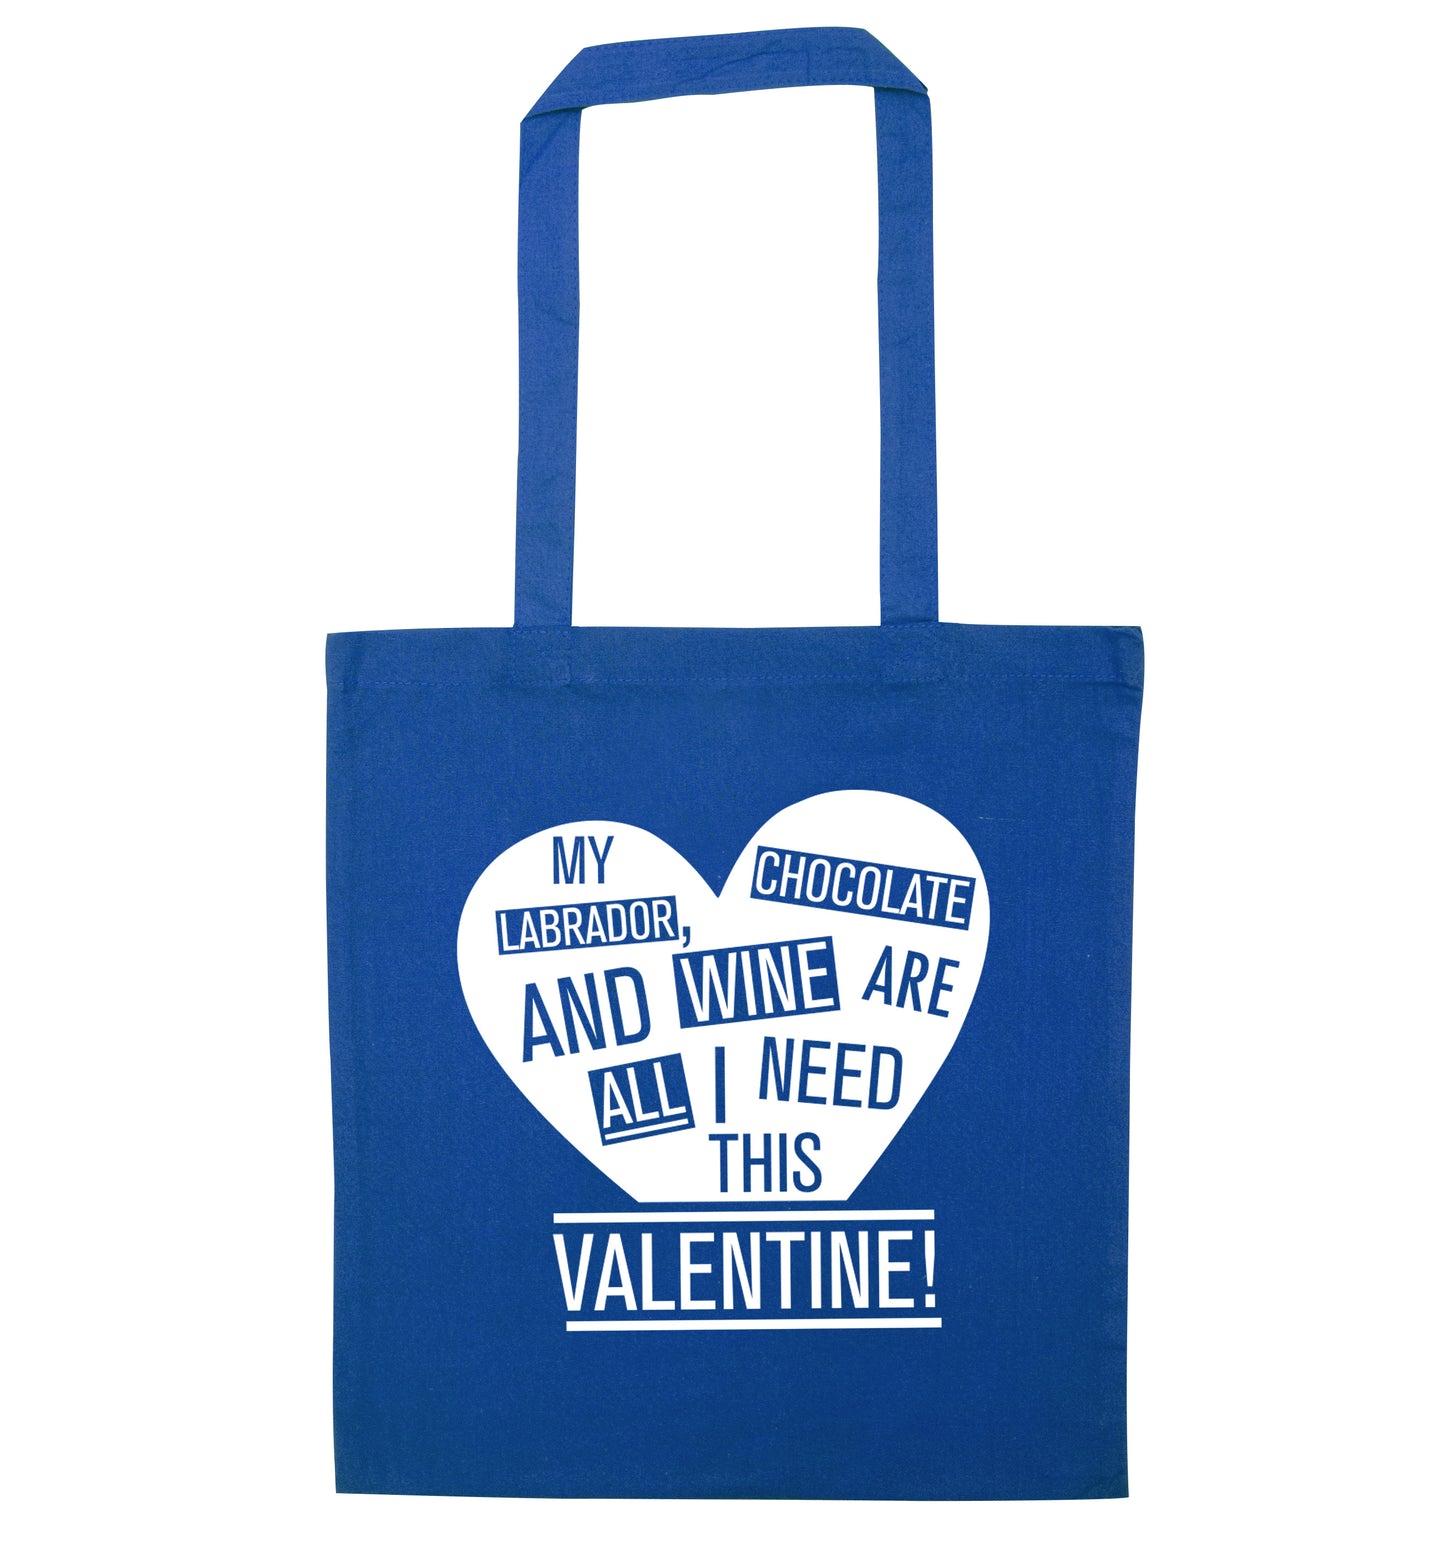 My labrador, chocolate and wine are all I need this valentine! blue tote bag